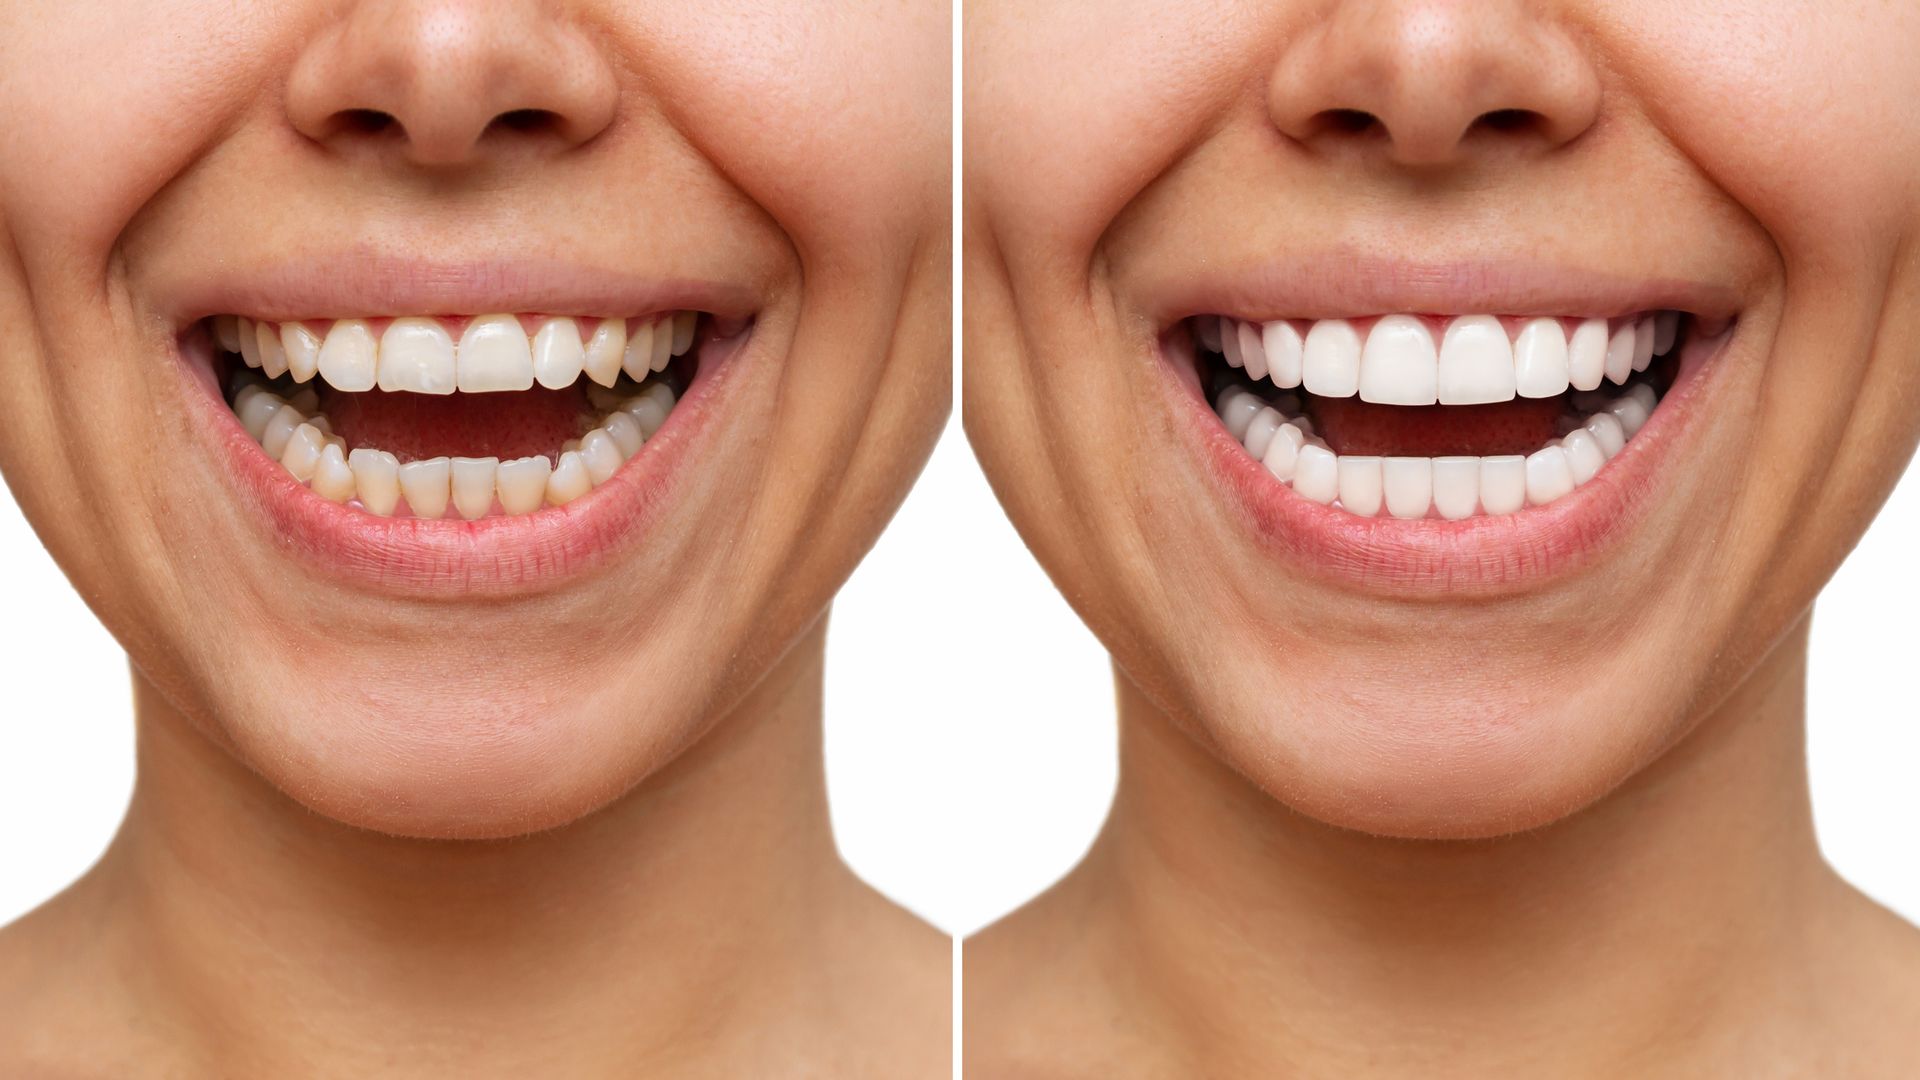 A before and after picture of a woman 's smile.